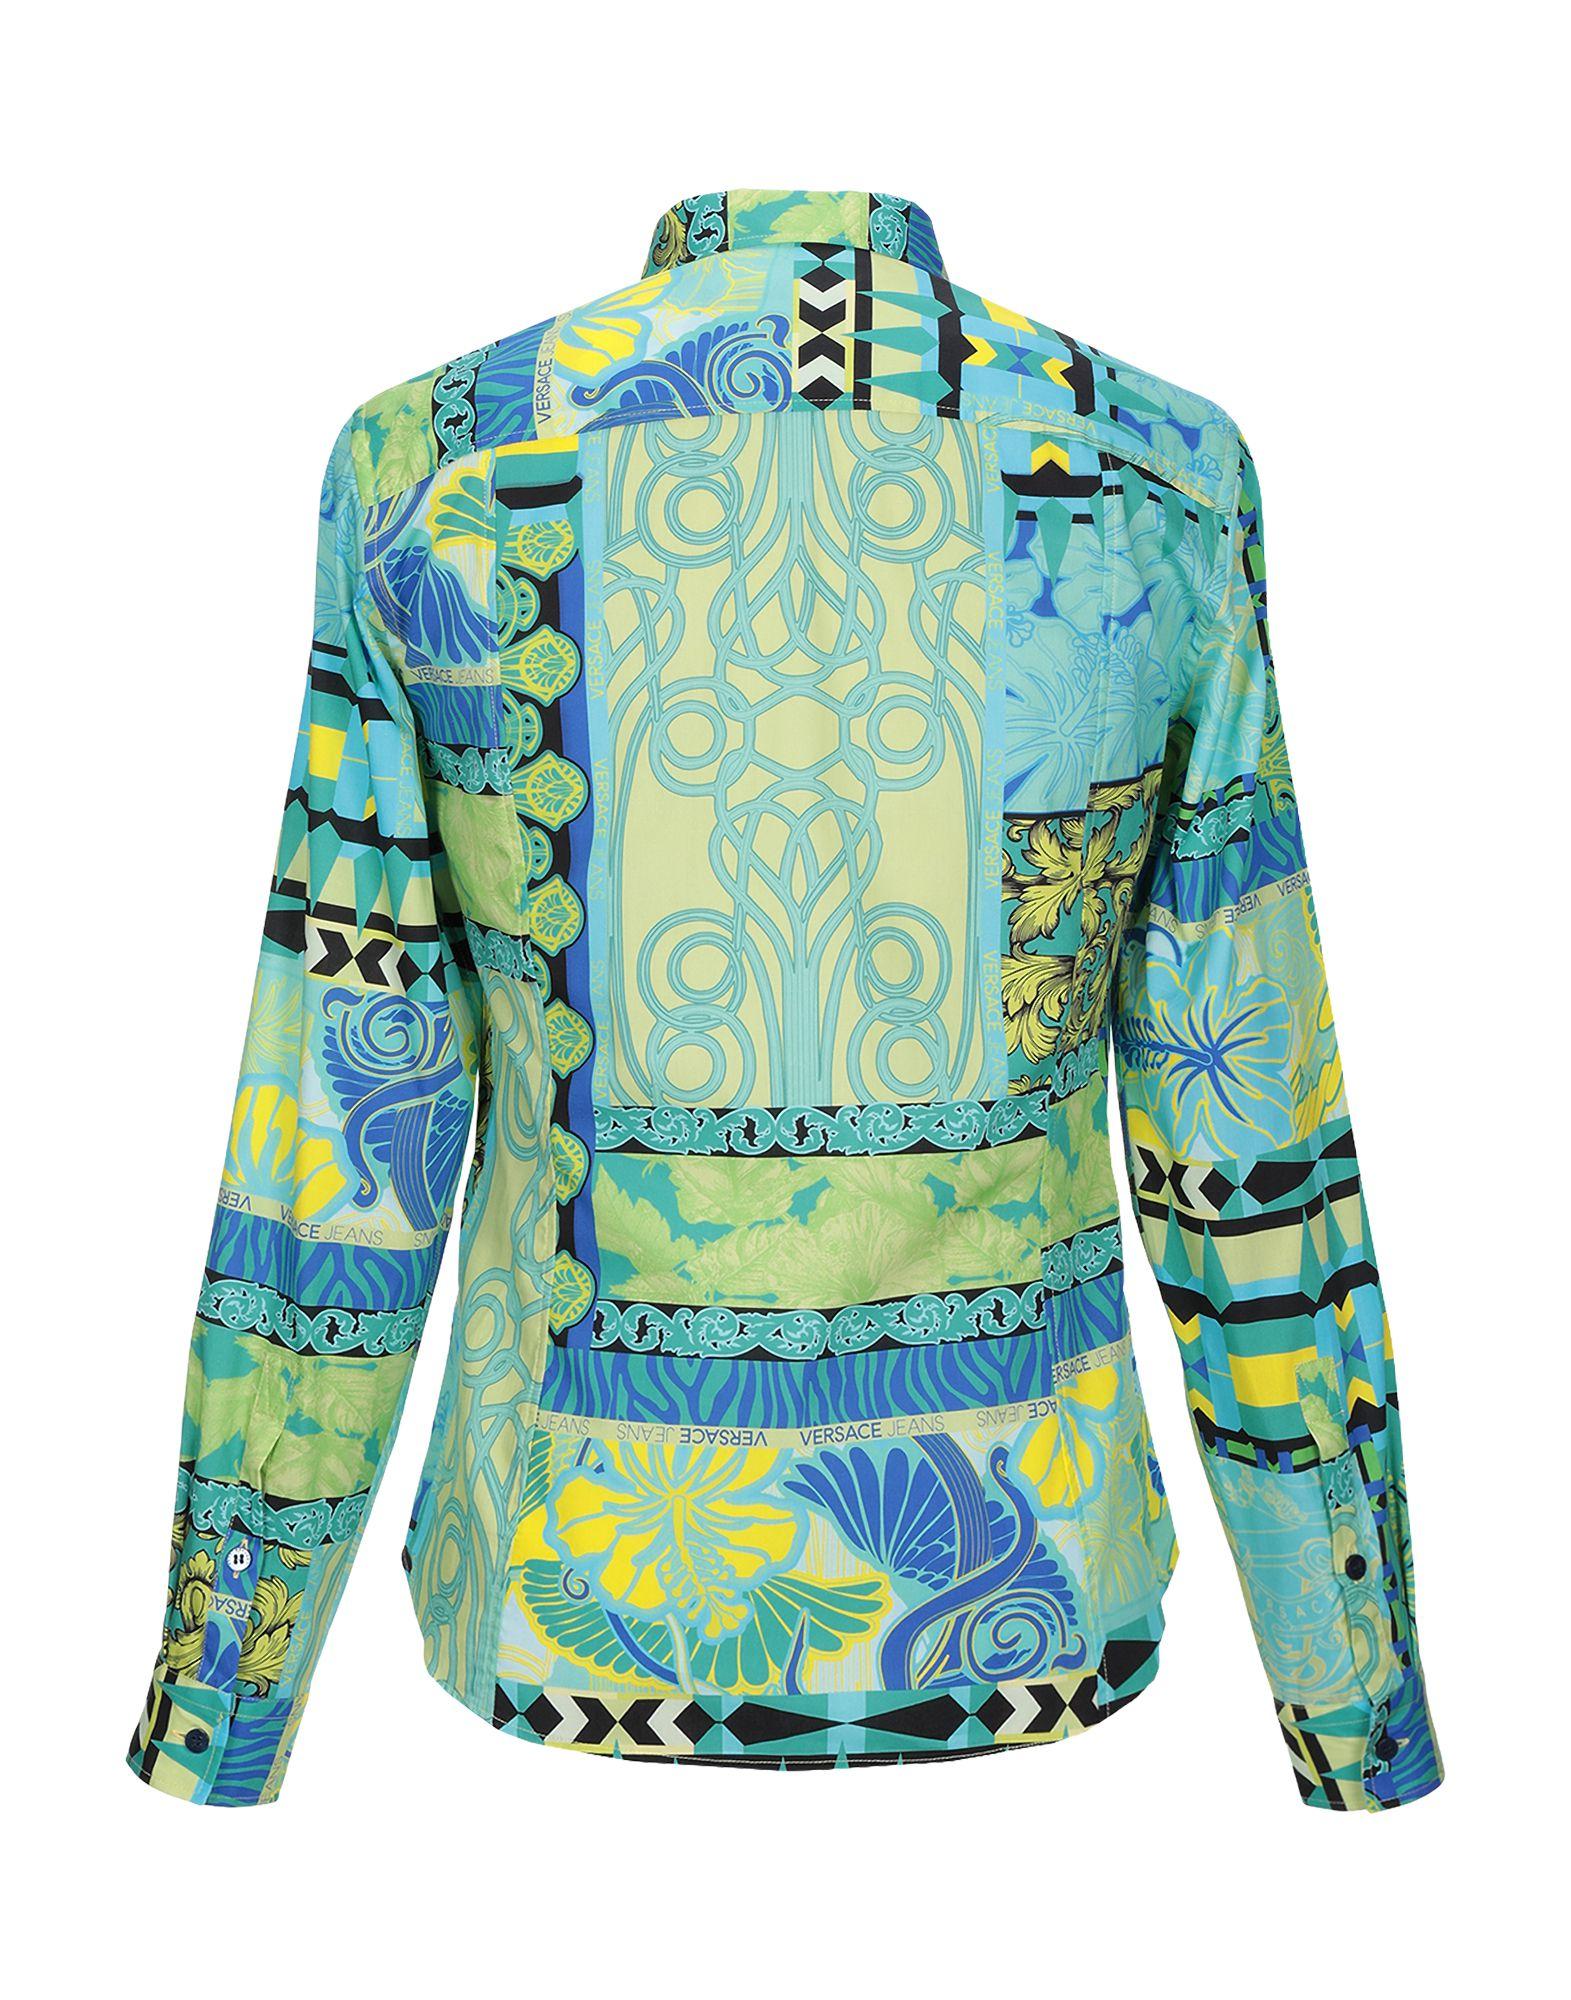 Versace Jeans Shirt in Green for Men - Lyst